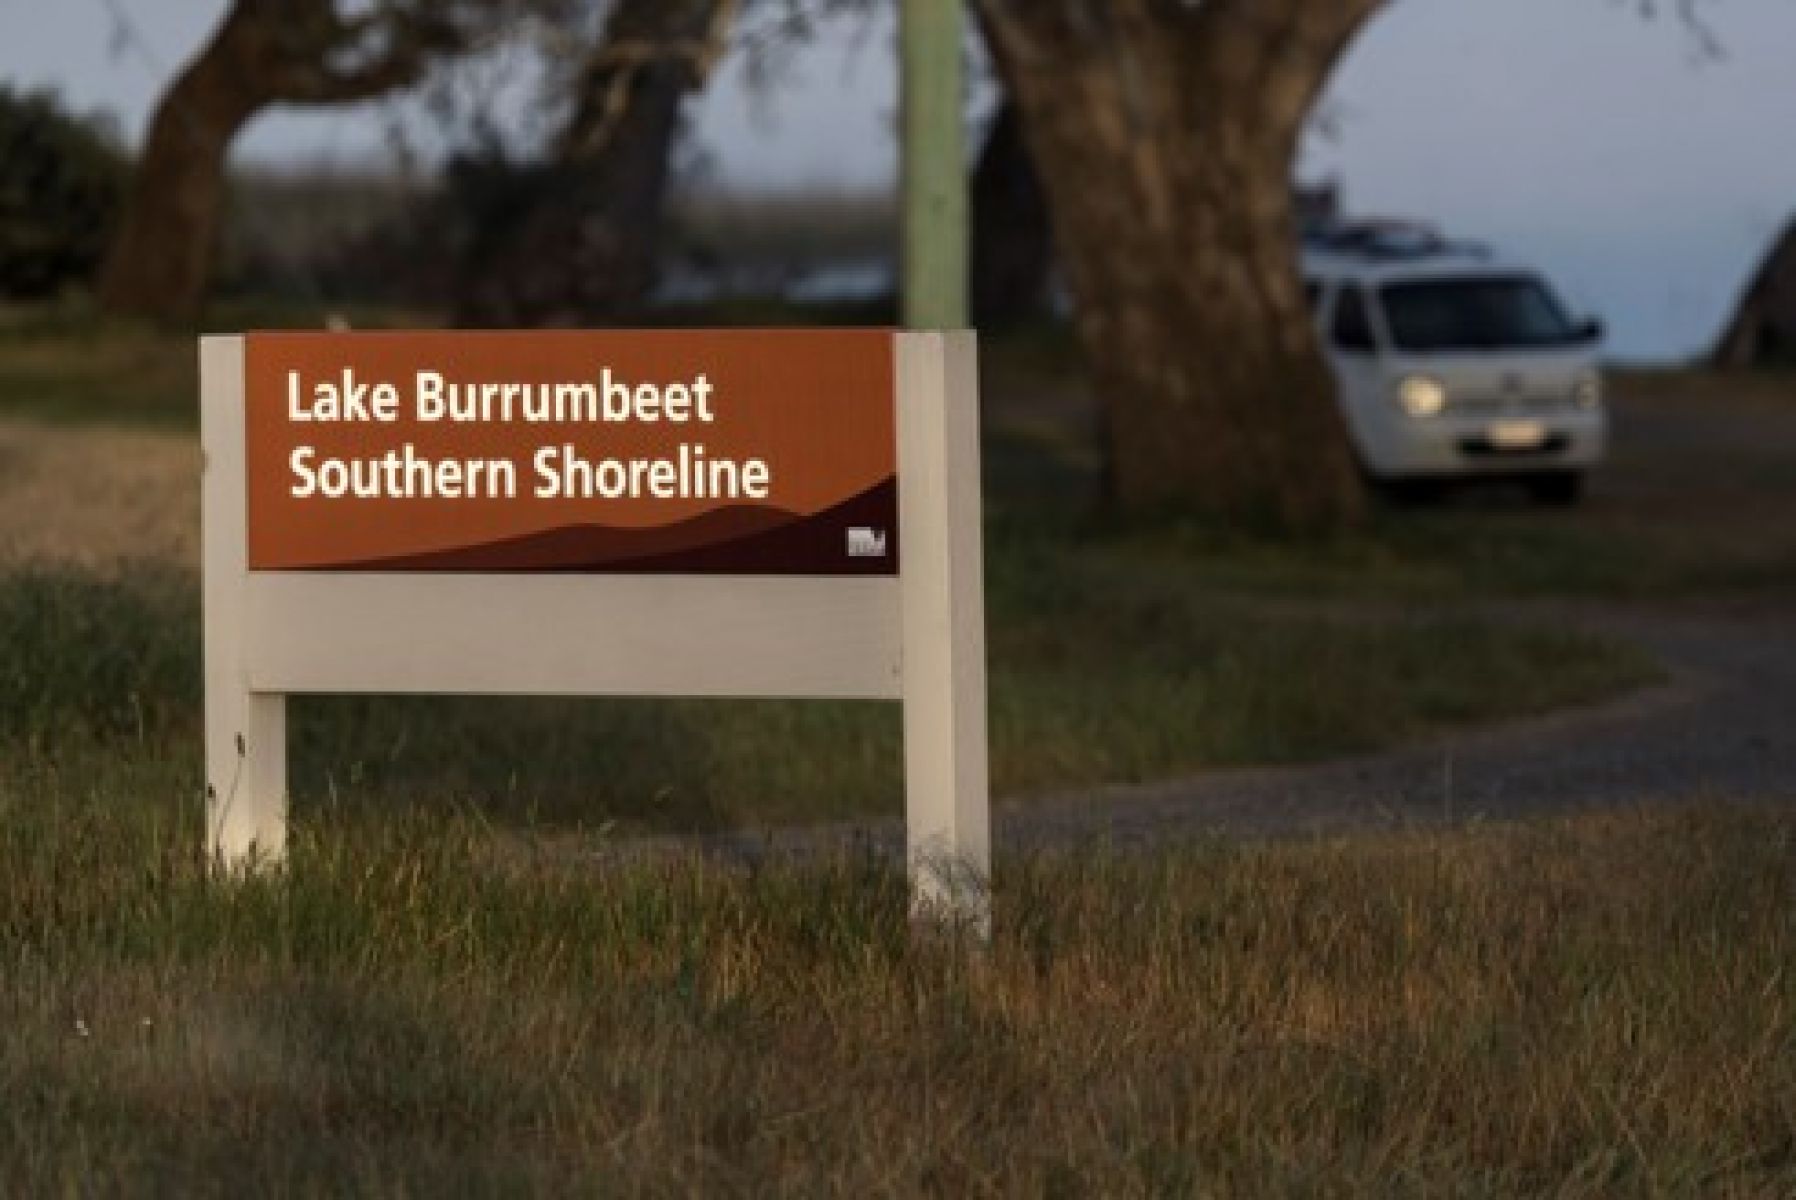 A white van drives towards a sign for Lake Burrumbeet